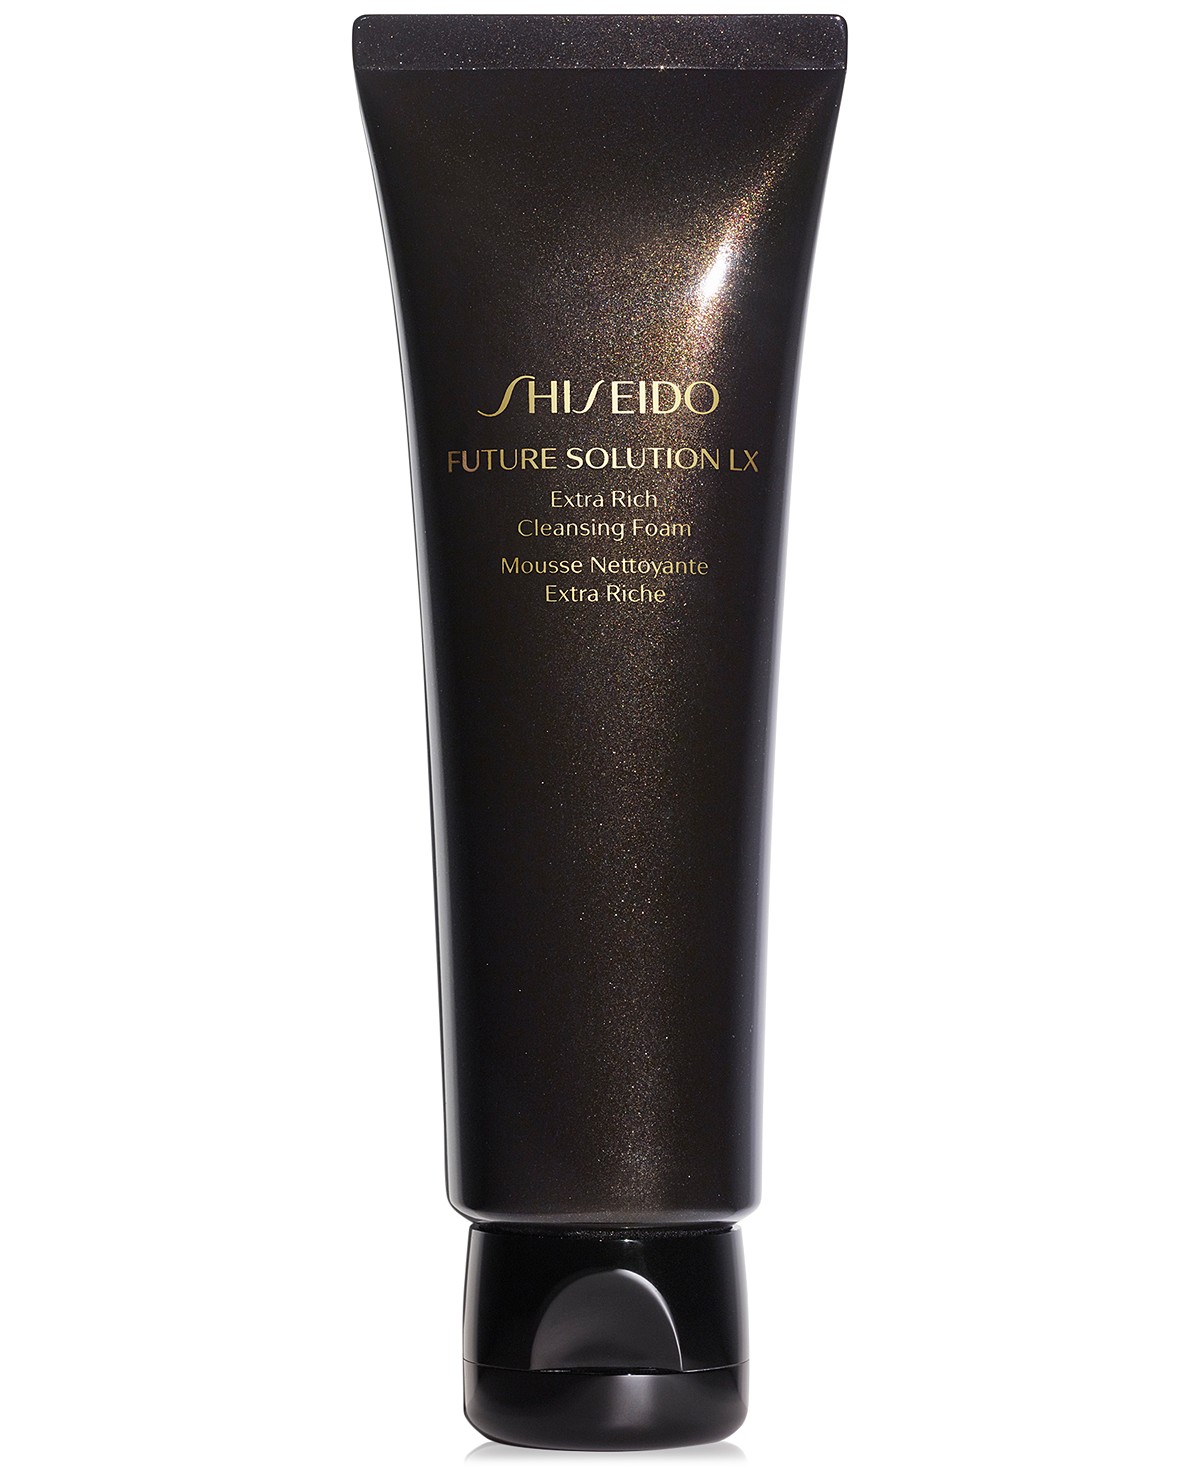 ($60 Value) Shiseido Future Solution LX Extra Rich Cleansing Foam, Face Wash for All Skin Types, 4.7 Oz - image 1 of 6